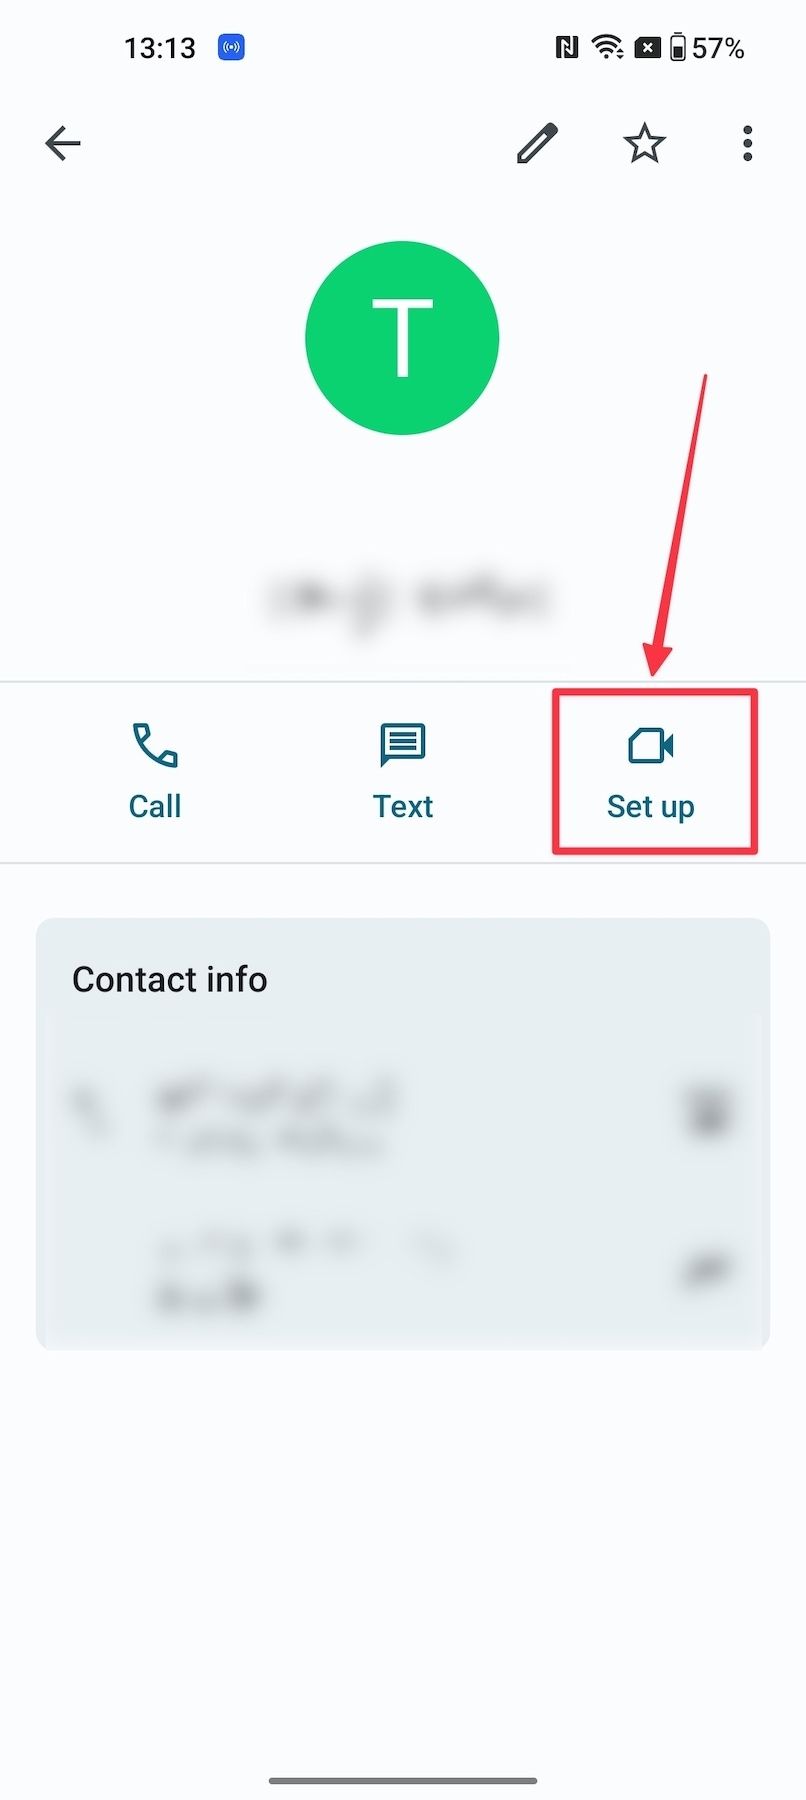 Screenshot showing Video call set up option in contact info page on Android